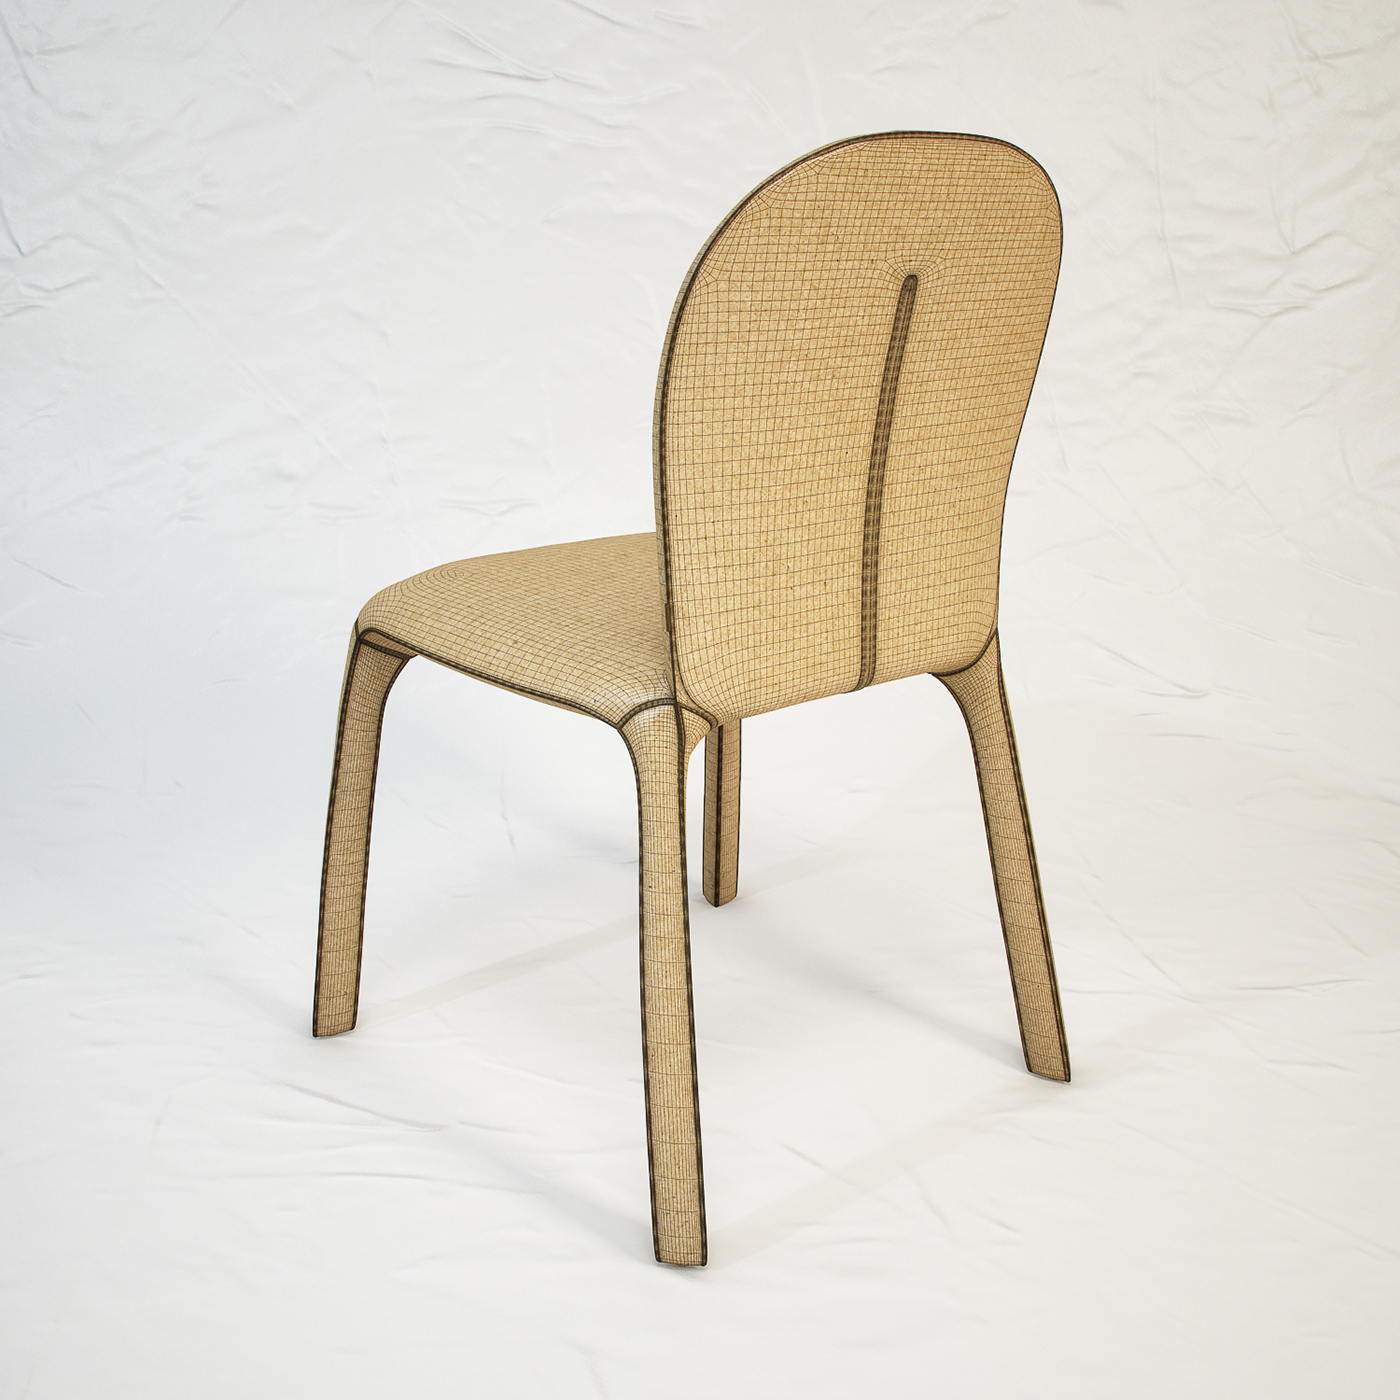 Poltrona Frau amelie chair leather 3D model download